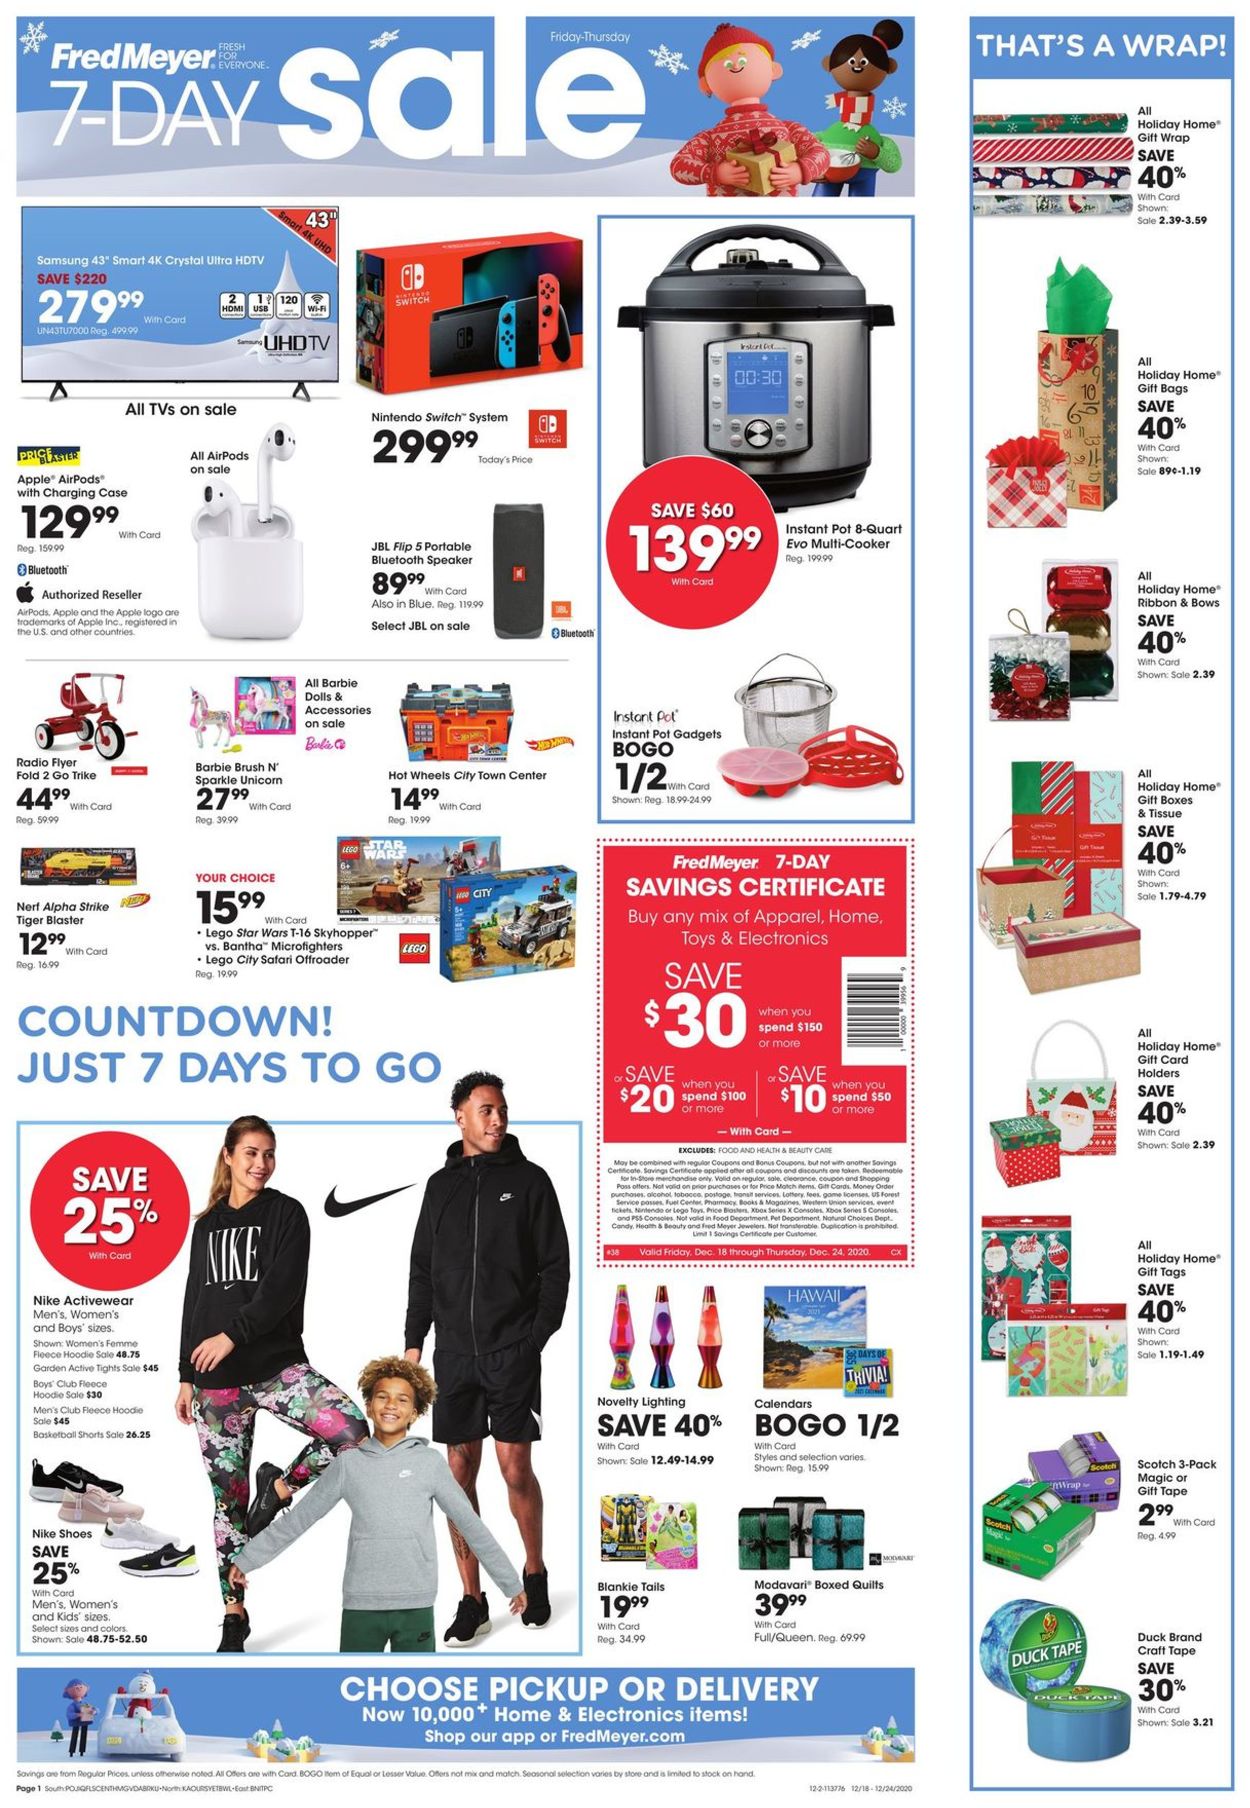 Fred Meyer Last 7 Days to Save Weekly Ad Circular - valid 12/18-12/24/2020